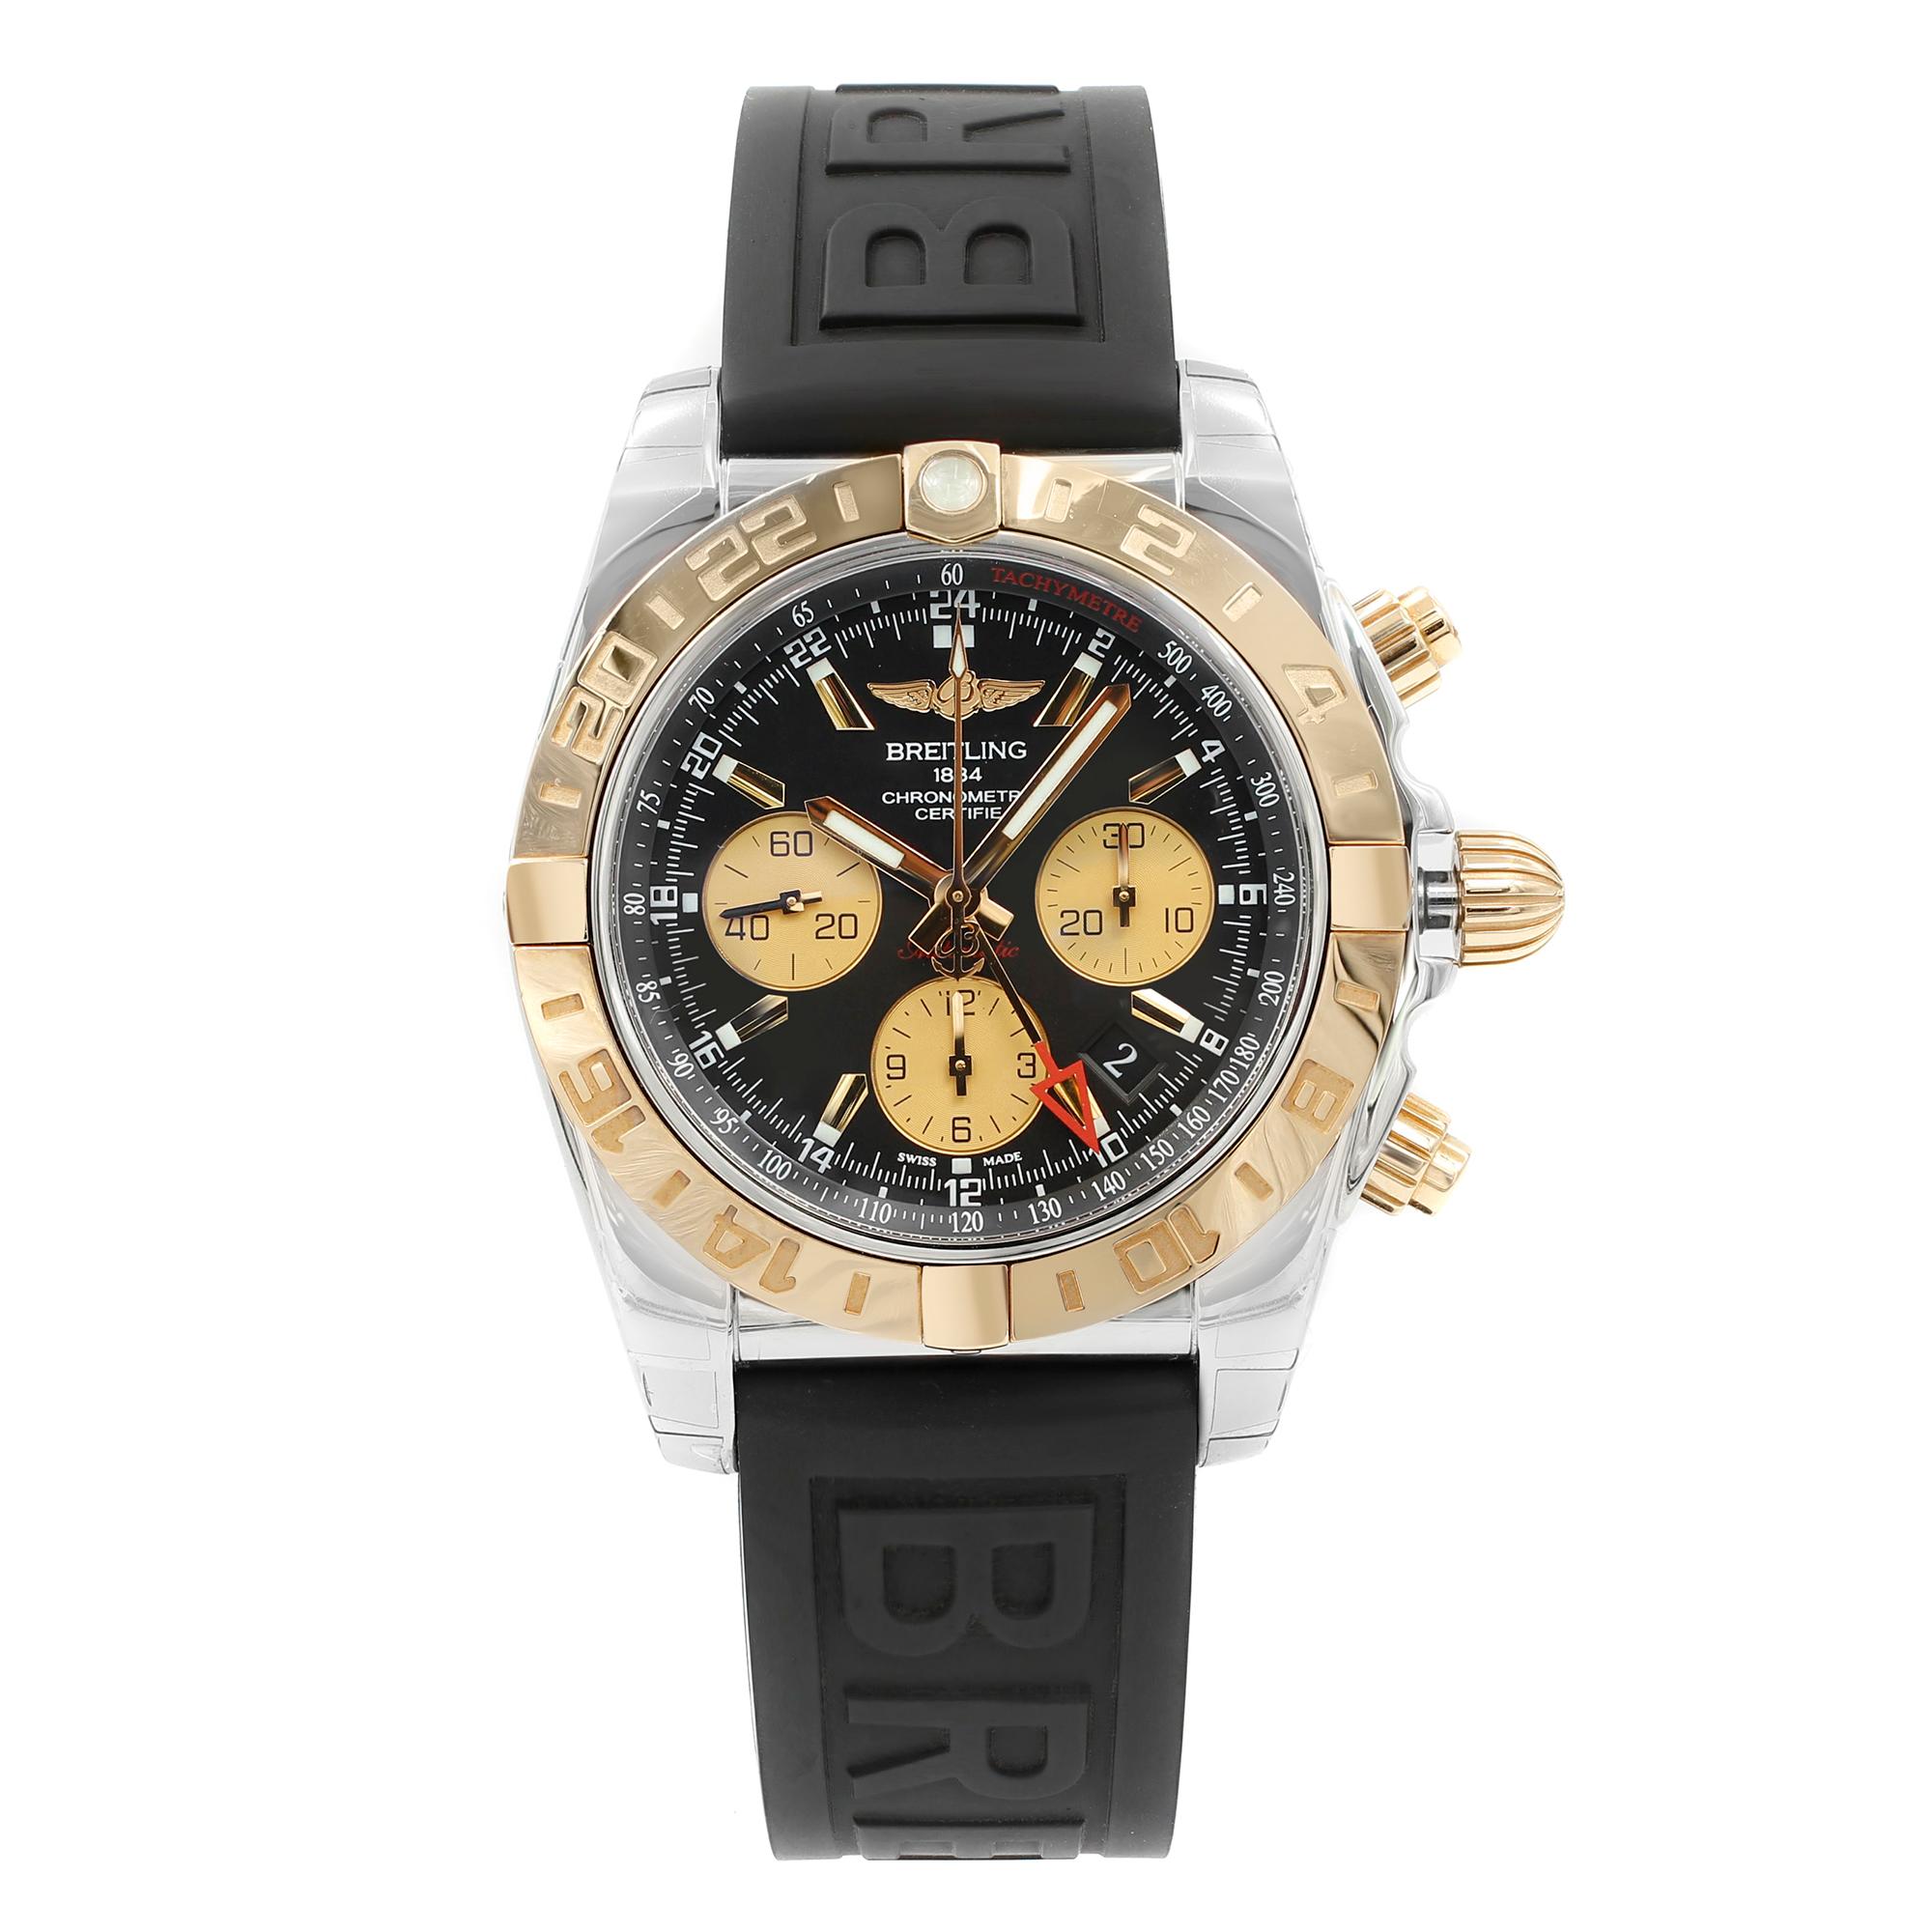 This display model Breitling Chronomat  CB042012/BB86-153S is a beautiful men's timepiece that is powered by an automatic movement which is cased in a stainless steel case. It has a round shape face, chronograph, date, dual time, small seconds